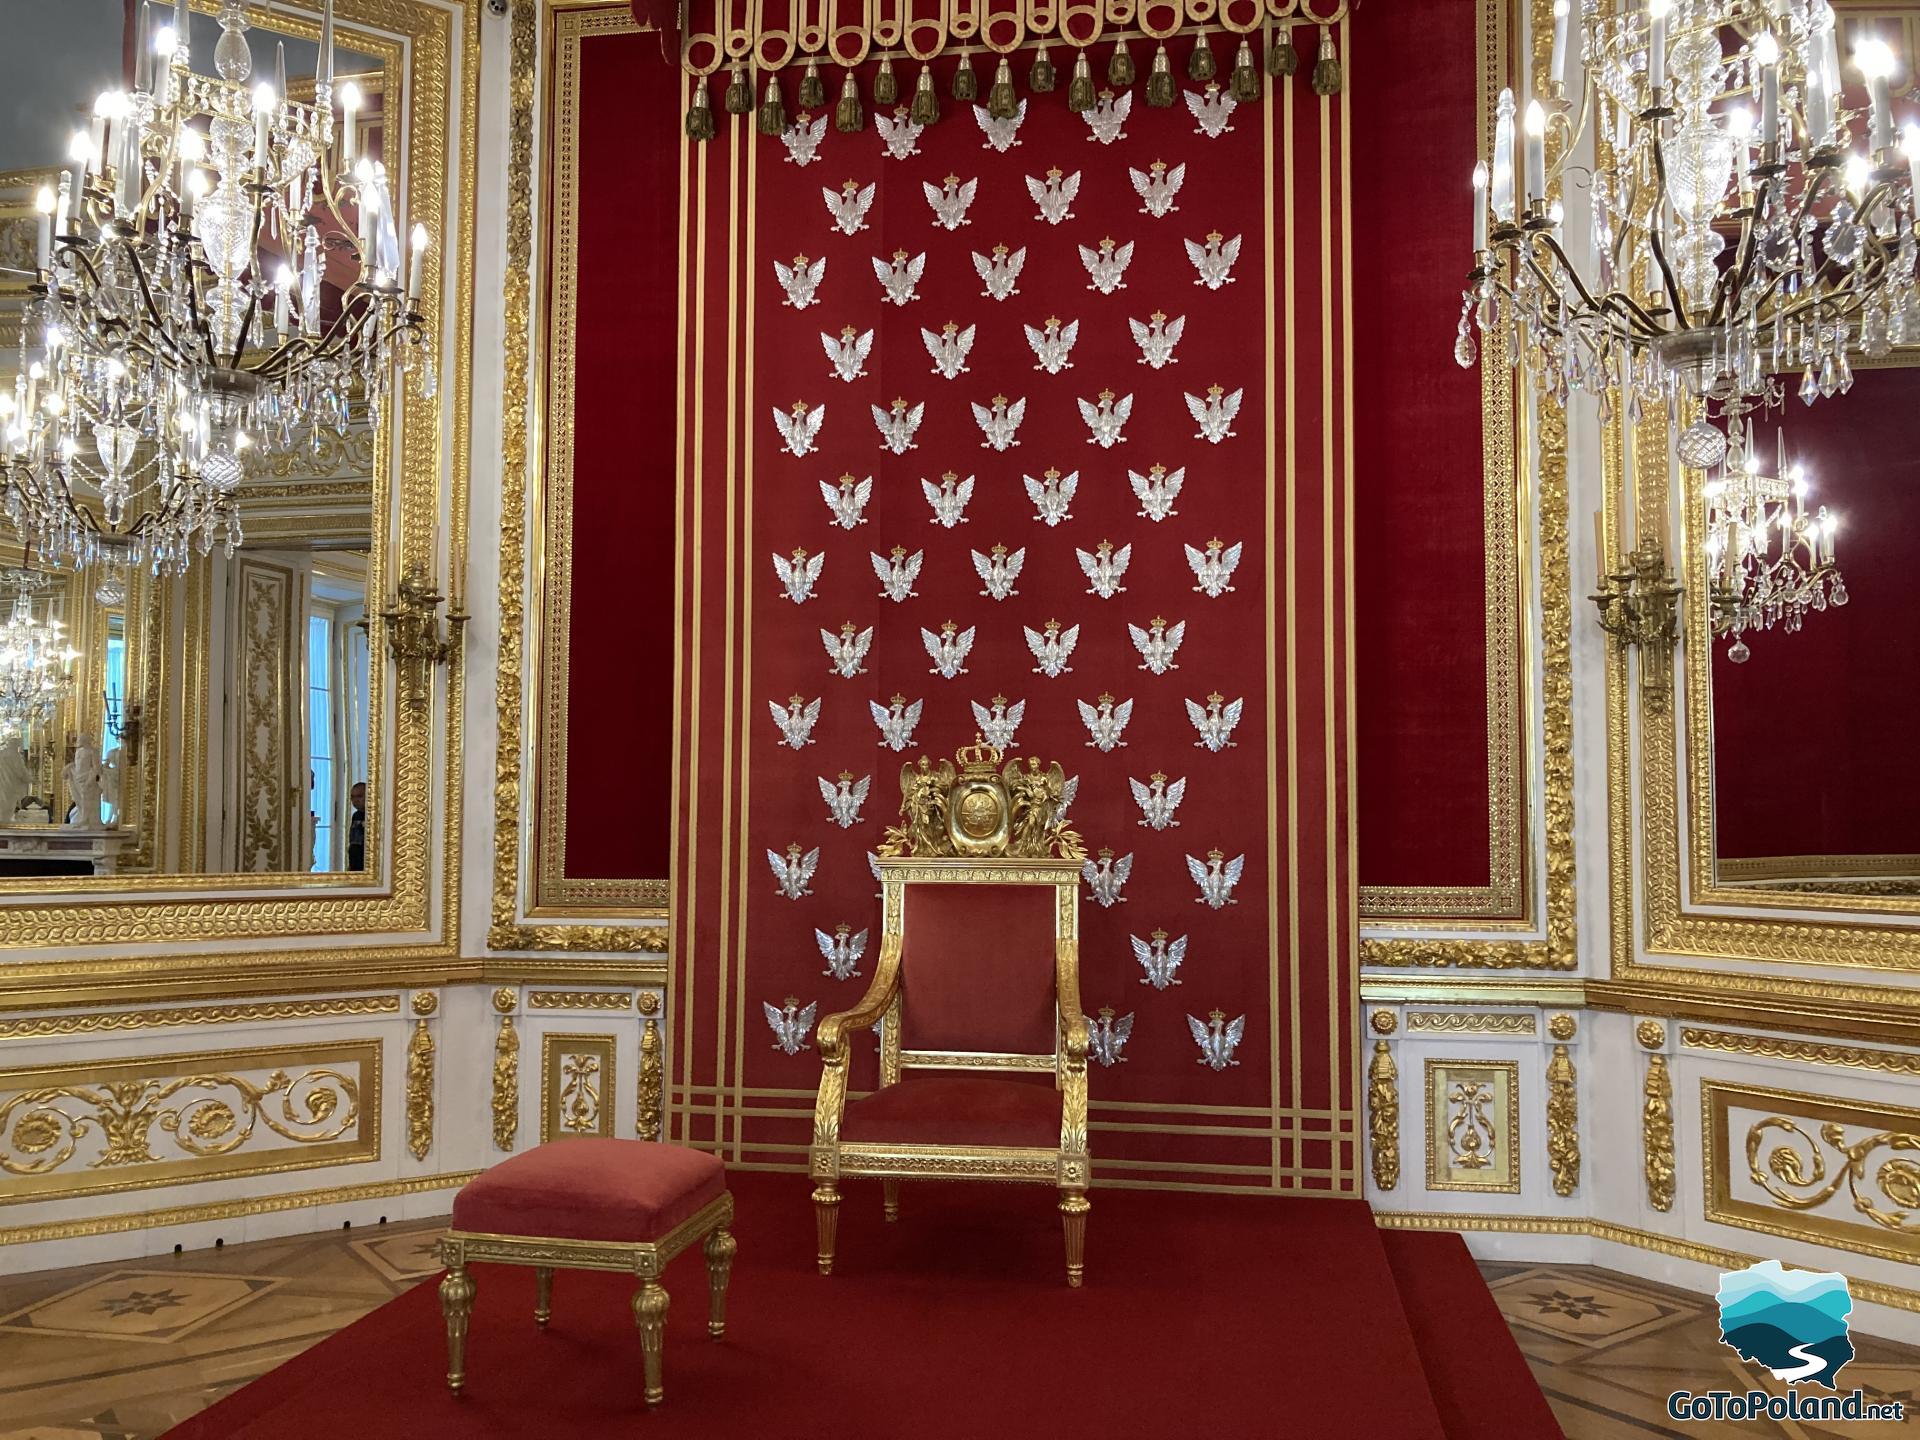 a red-gold throne close up, two huge mirrors in golden frames, behind the throne is a wall of red fabric on which small silver eagles are pinned